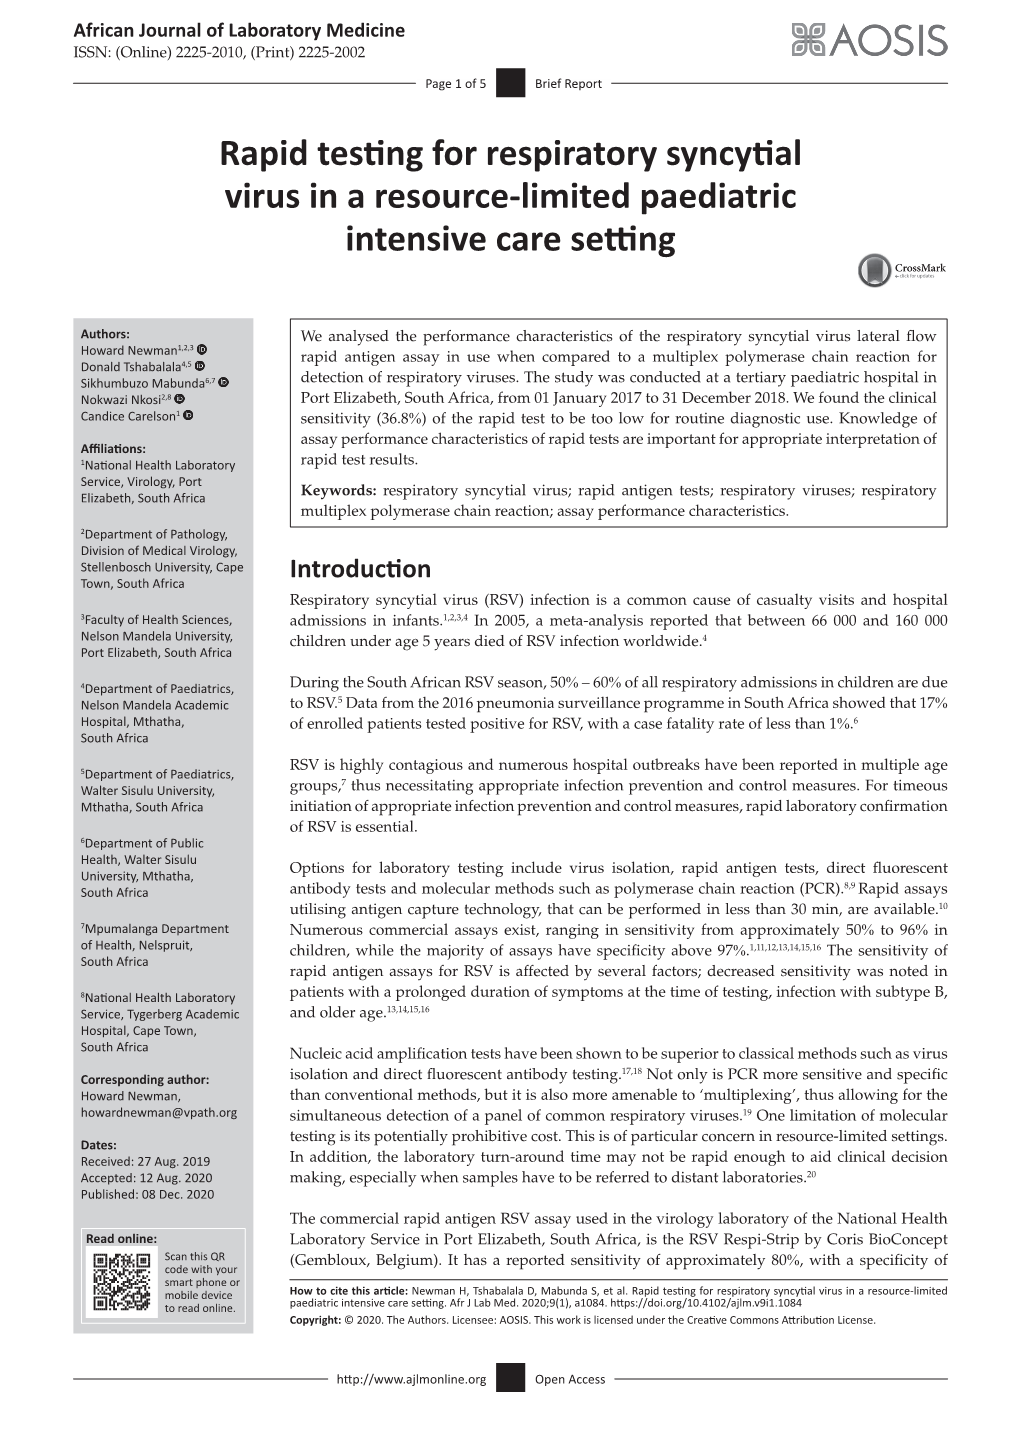 Rapid Testing for Respiratory Syncytial Virus in a Resource-Limited Paediatric Intensive Care Setting